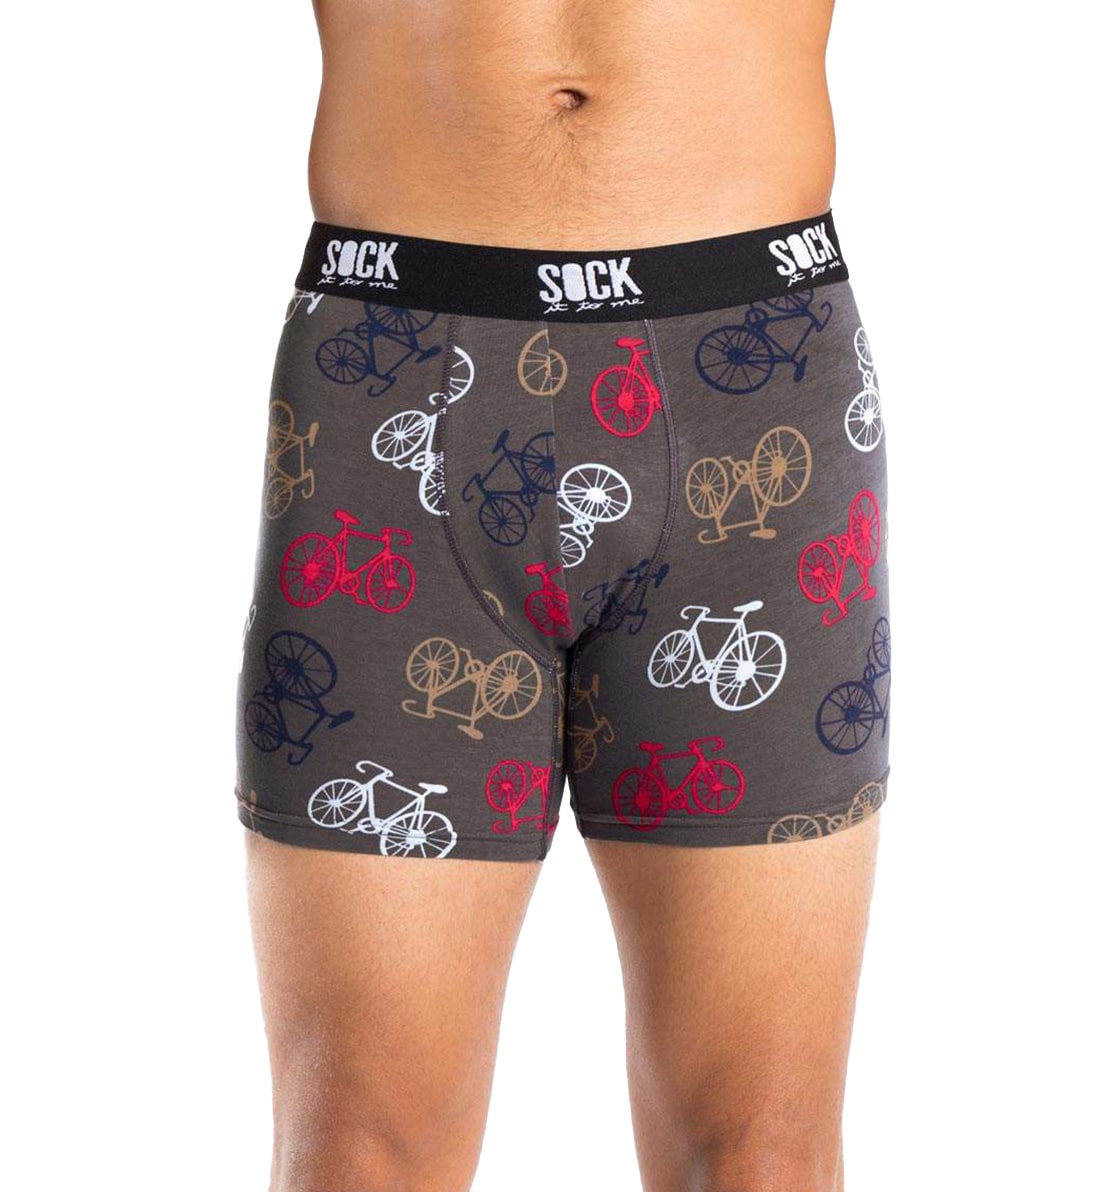 SOCK it to me Men&#39;s Boxer Brief (umb030),Small,Large Bikes - Large Bikes,Small